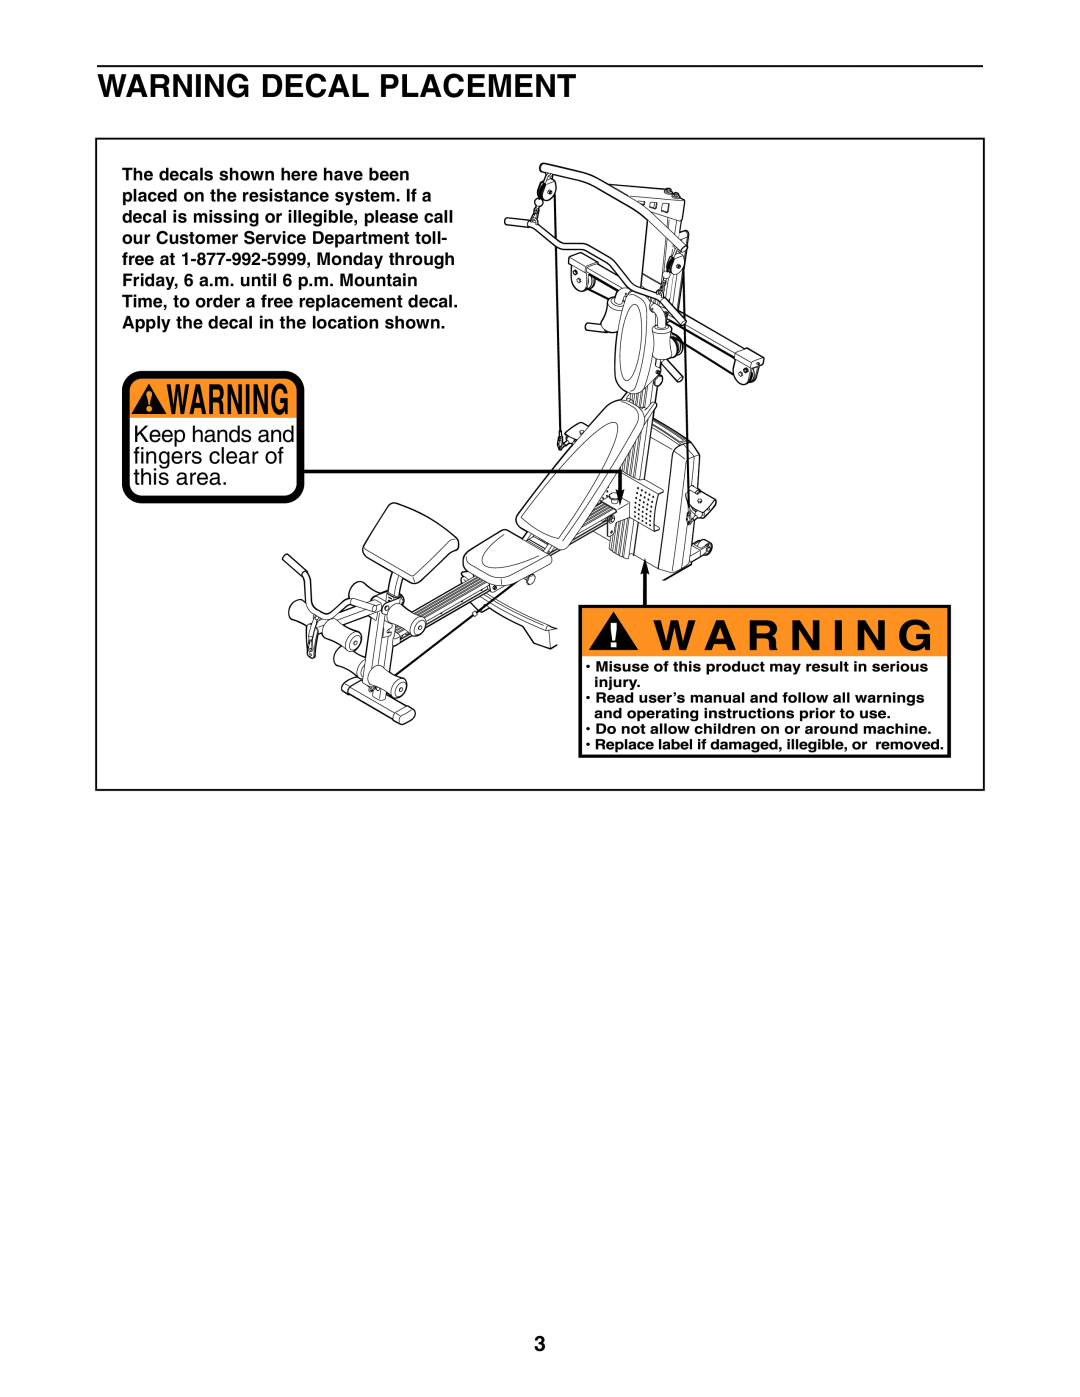 Weider WESY78734 user manual Warning Decal Placement, Keep hands and fingers clear of this area 